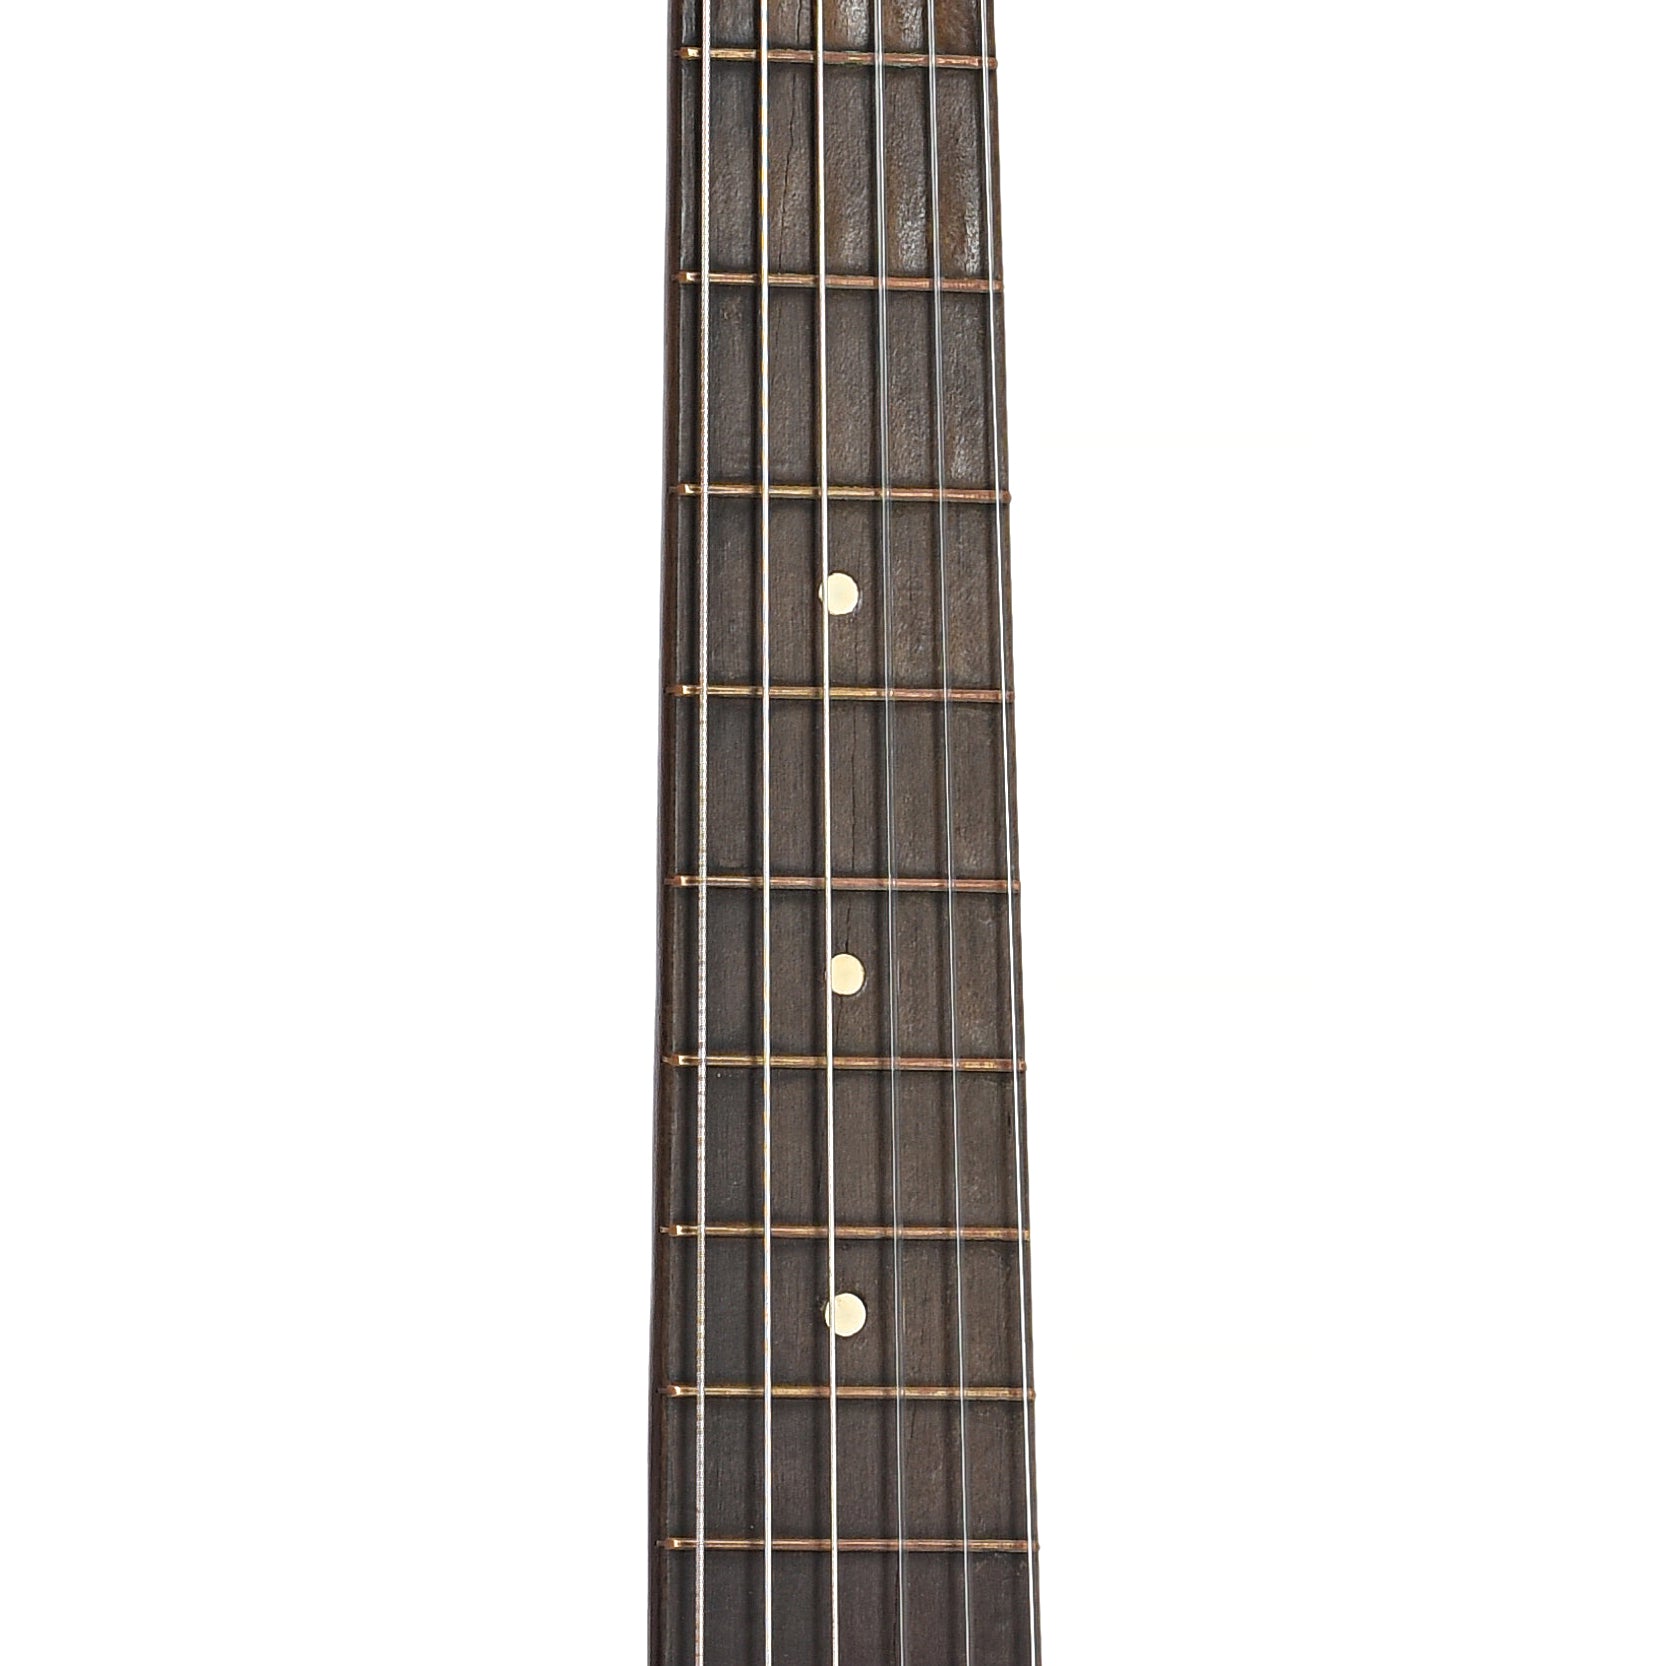 Fretboard of Slingerland May-Bell Style No.5 Parlor Guitar (1930s)